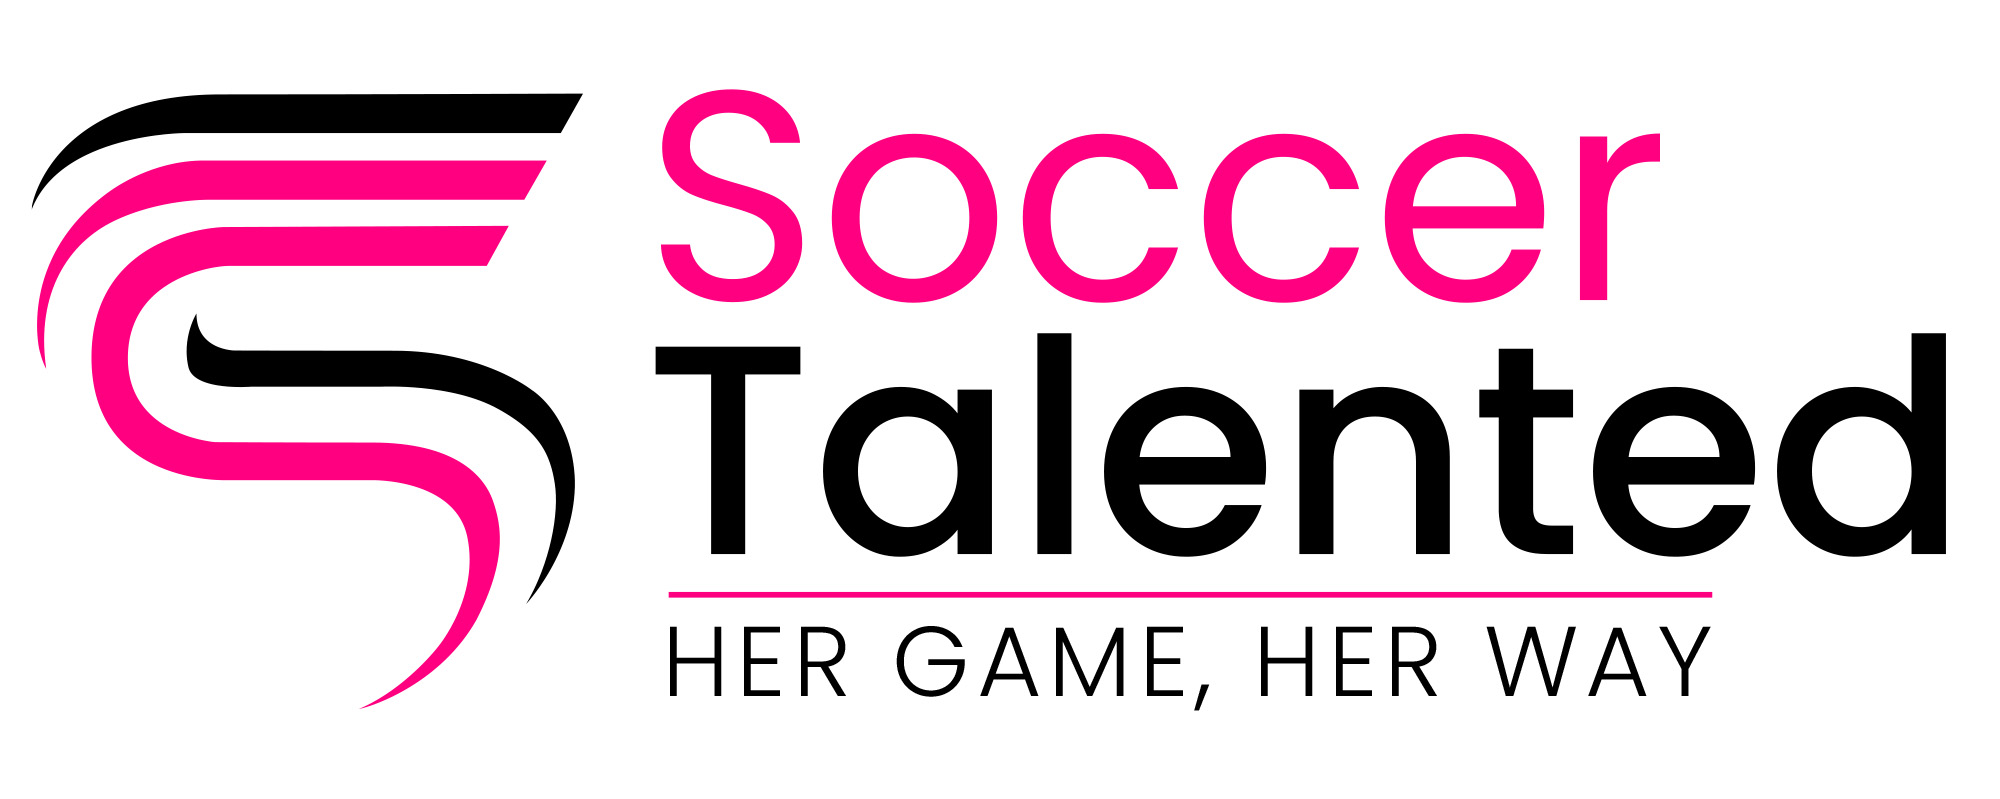 Soccer Talented logo, word 'Soccer' in pink, 'Talented' in black, tagline 'Her Game, Her Way' in black underneath.